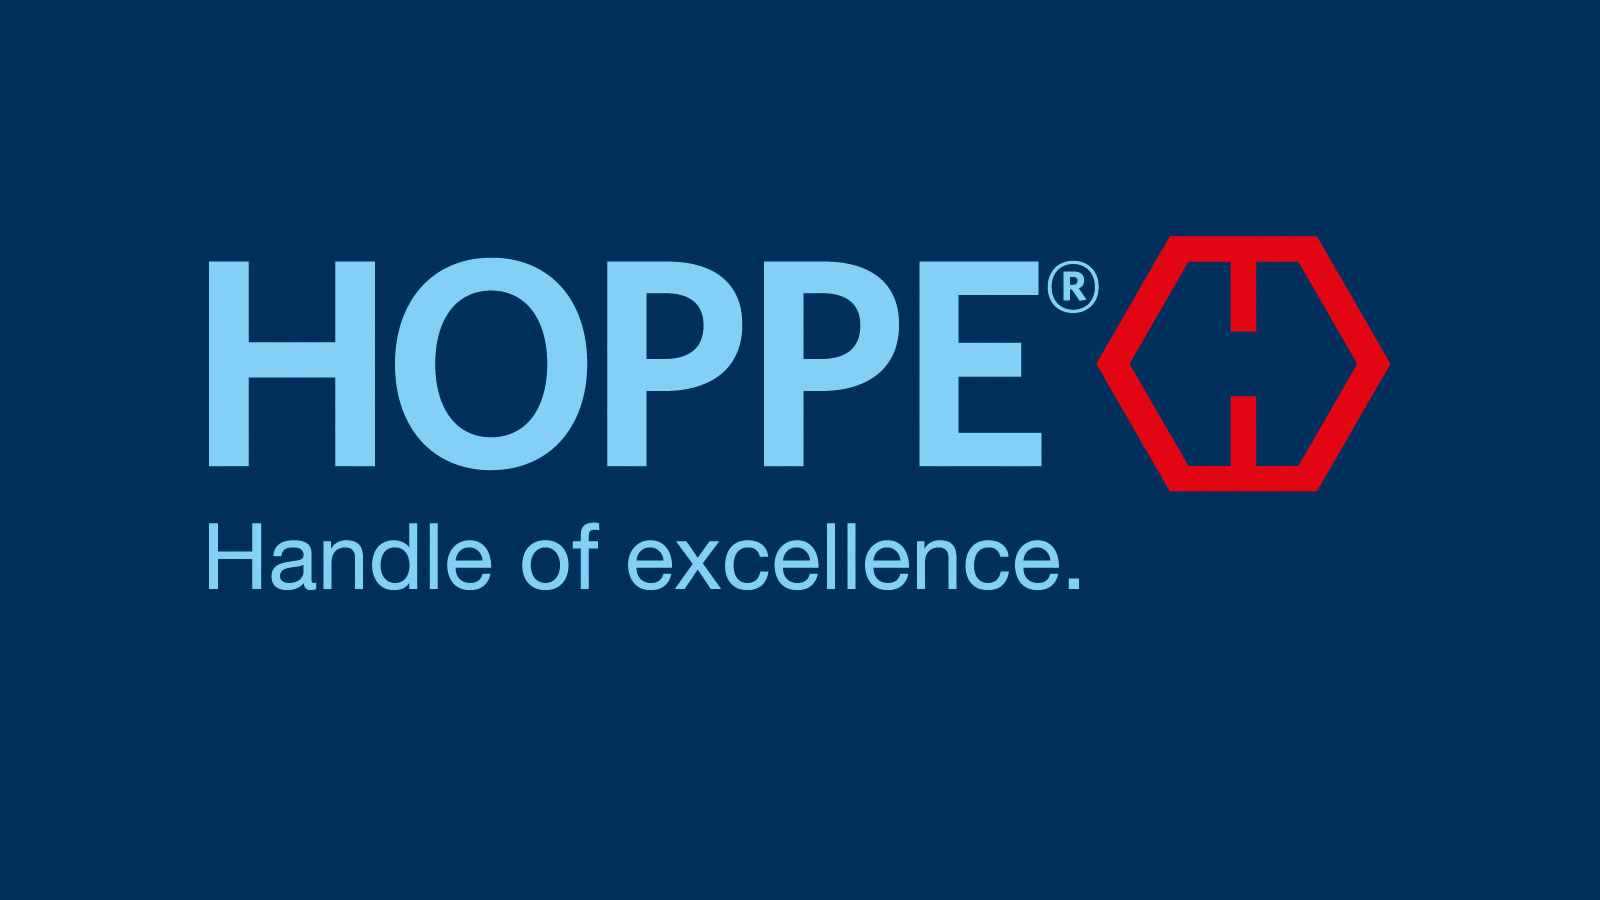 HOPPE – Handle of excellence.